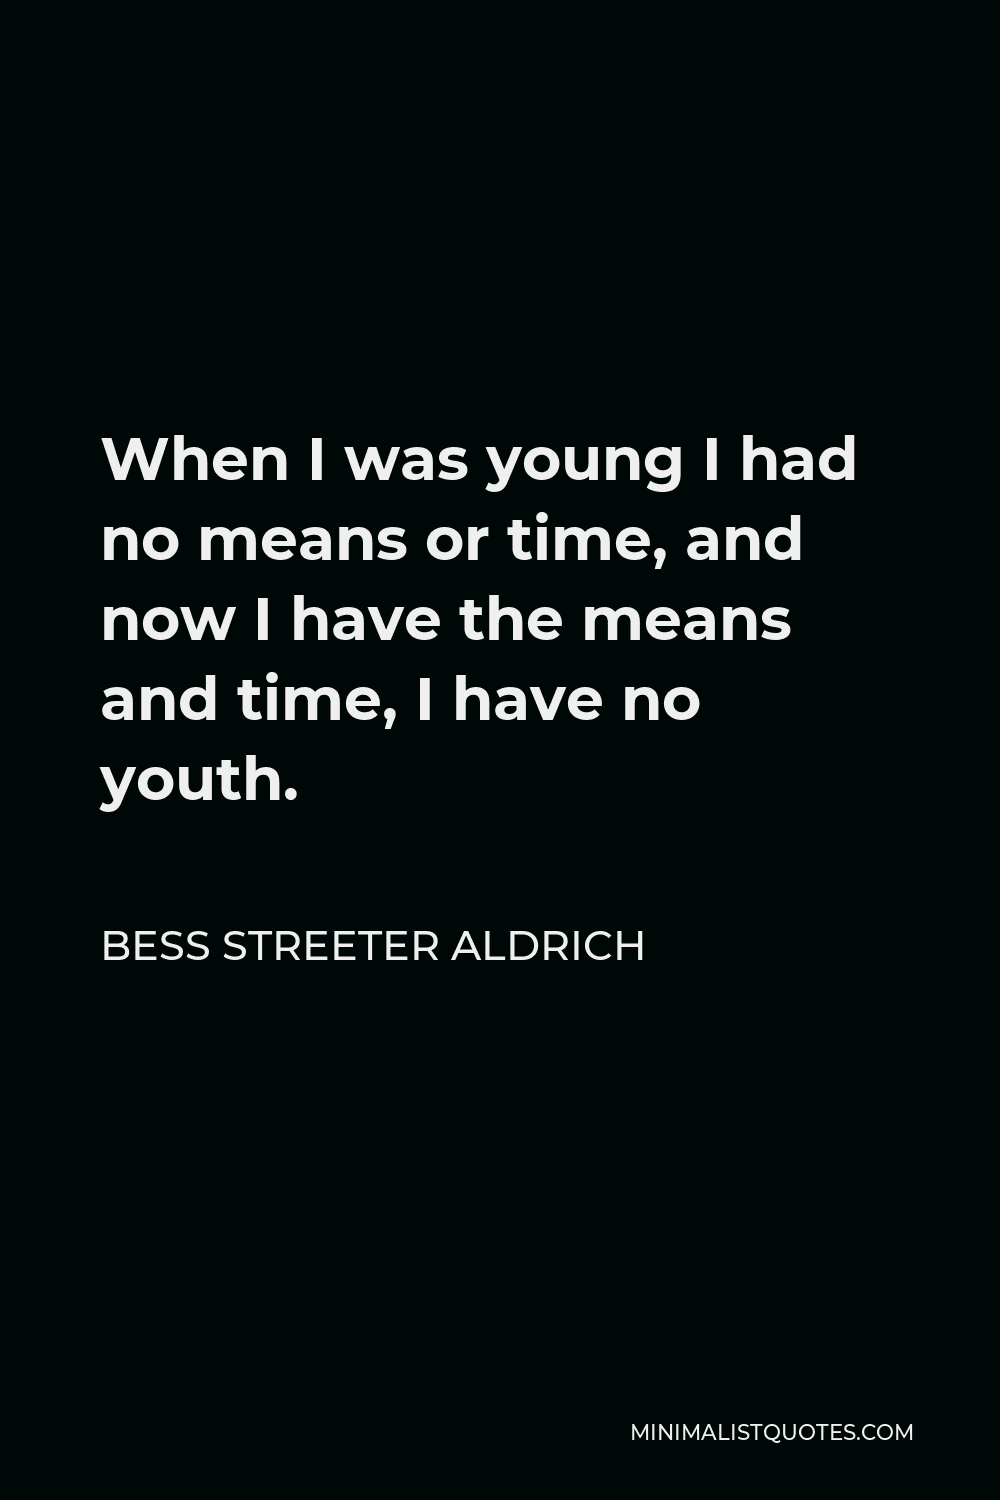 Bess Streeter Aldrich Quote - When I was young I had no means or time, and now I have the means and time, I have no youth.